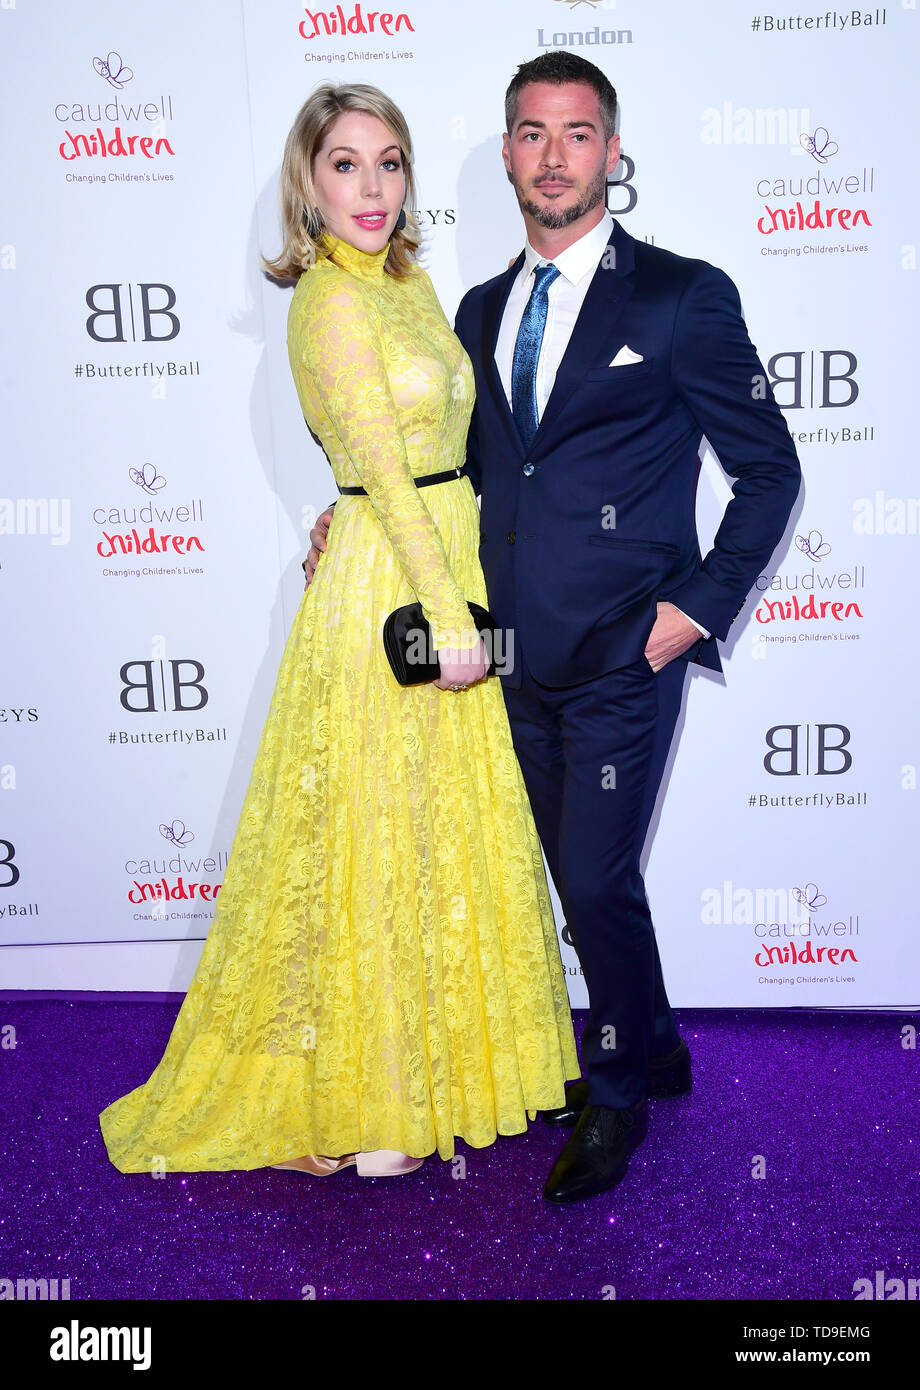 Katherine Ryan and Bobby Kootstra attending the Butterfly Ball Charity fundraiser held at the Grosvenor House Hotel London. Stock Photo